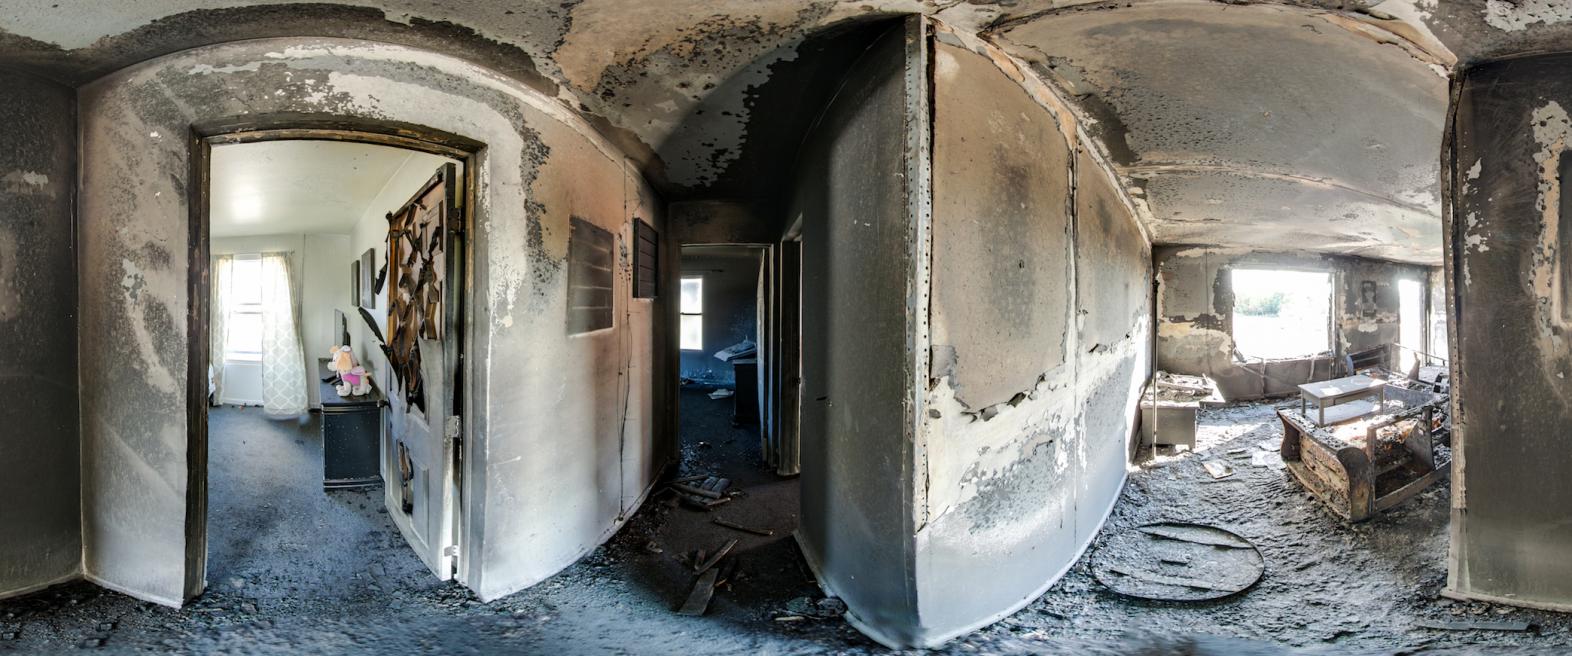 360 image of two bedrooms after a fire, one with the door open and one with the door closed